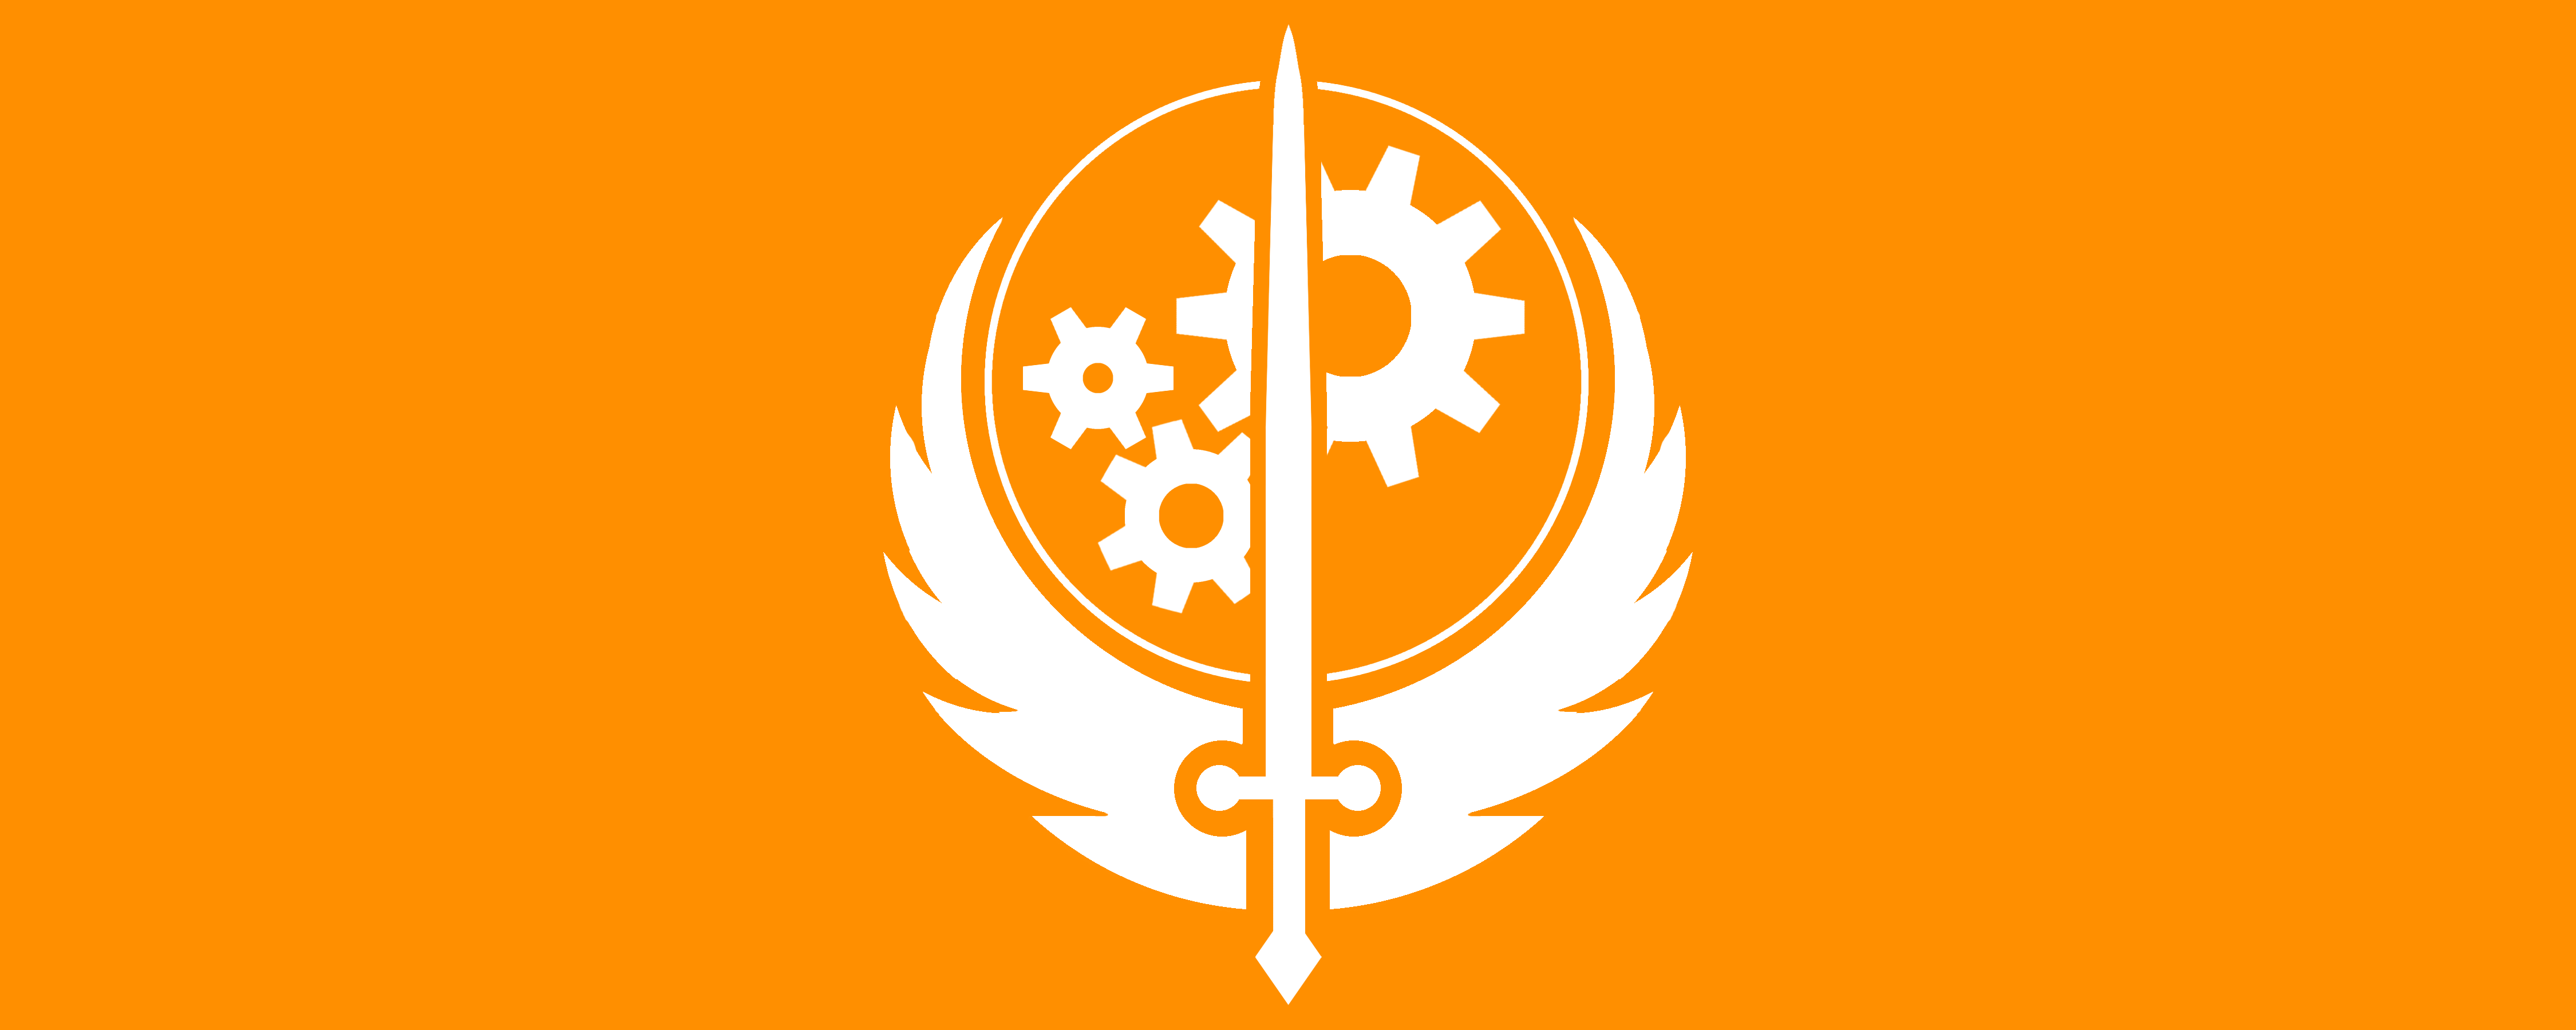 Fallout Video Games Orange Background Simple Background Video Game Art Brotherhood Of Steel 4500x1800